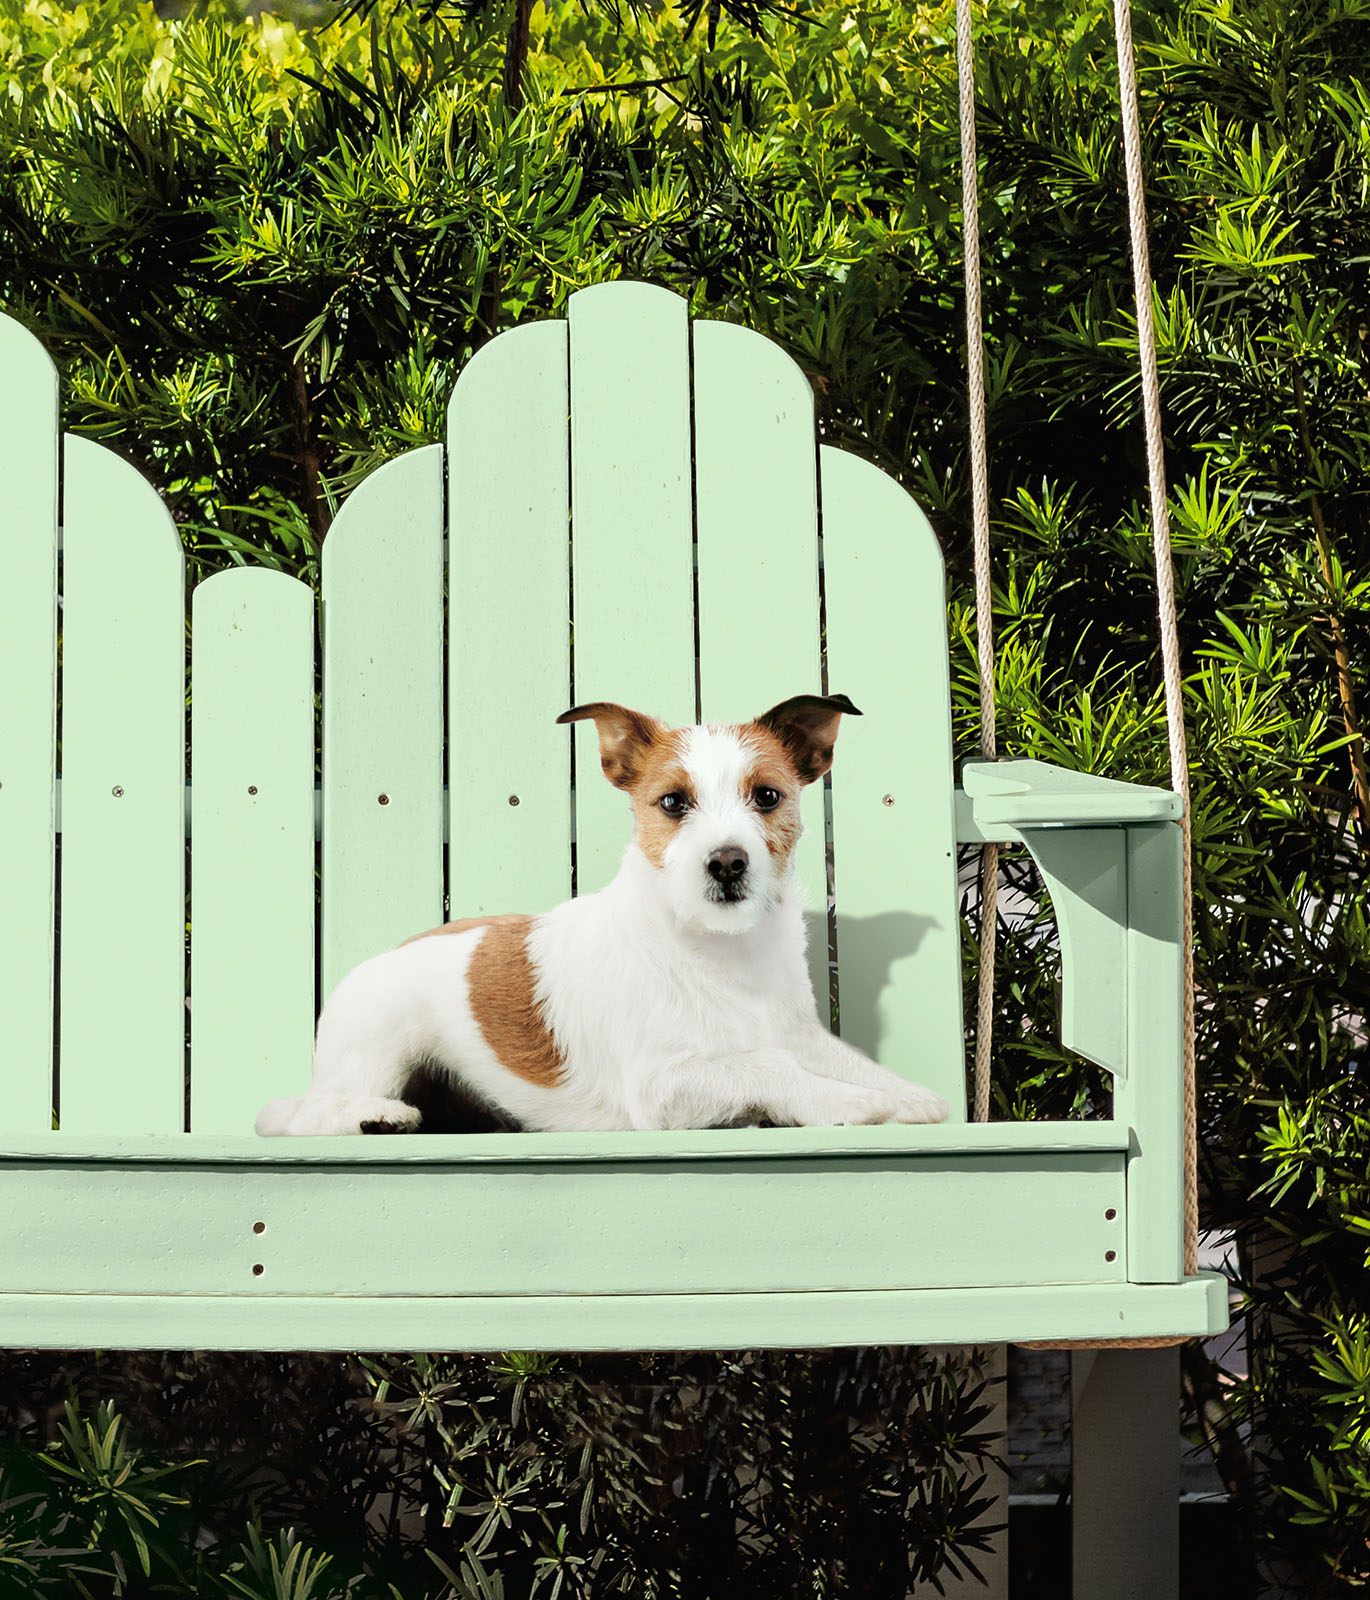 A dog sitting on a green painted outdoor large swing.